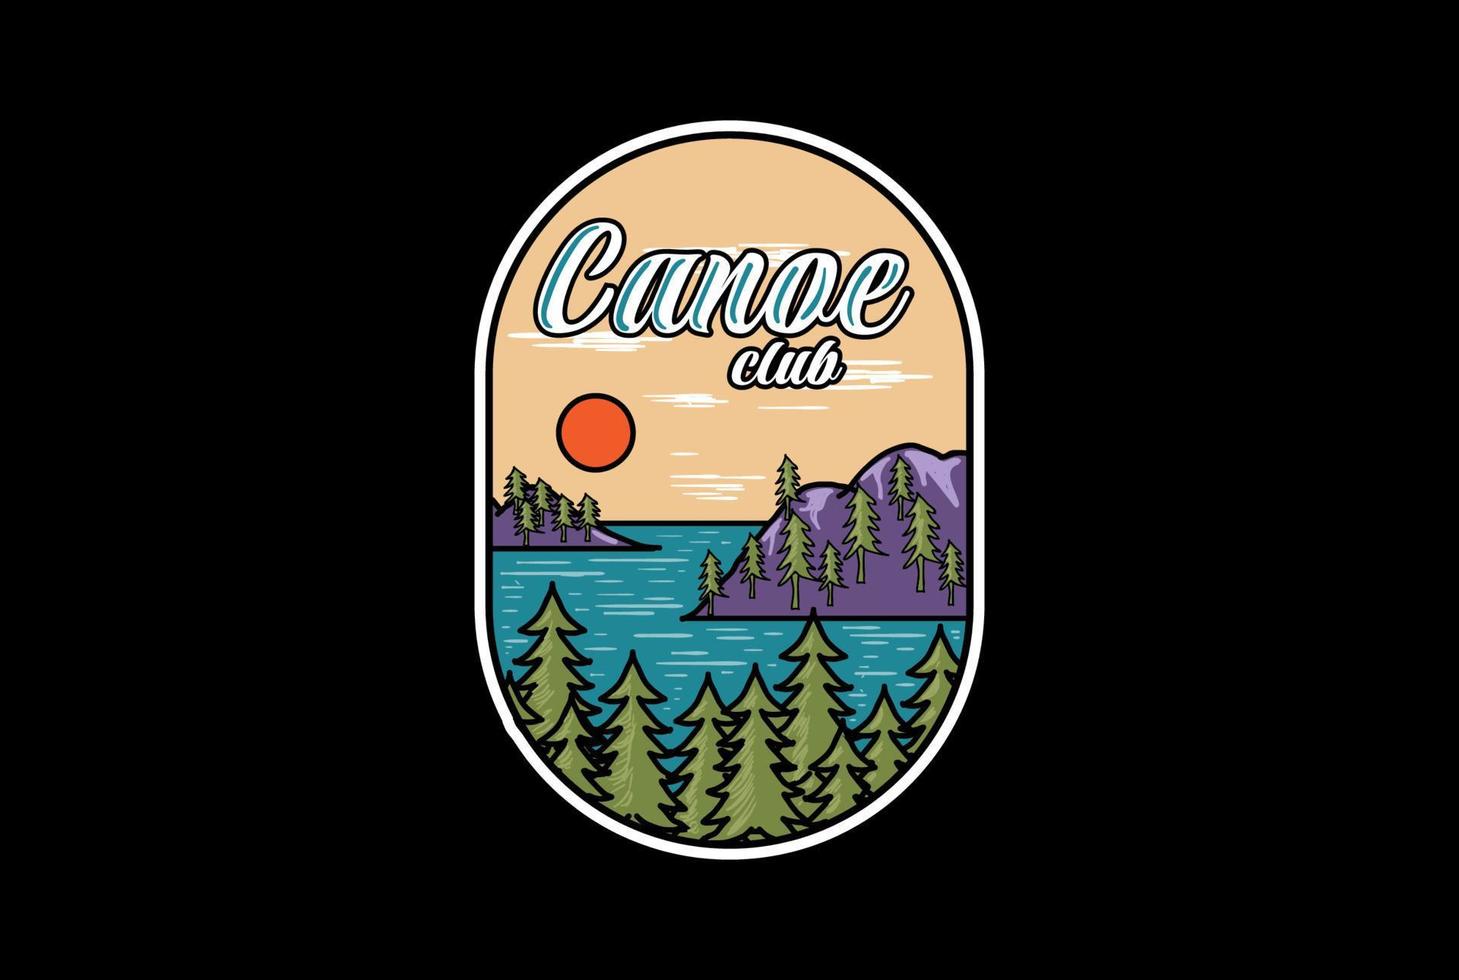 Round Pine Evergreen Spruce Conifer Larch Cypress Fir Forest with Lake Creek River Badge Emblem for Outdoor Rafting Kayaking or Canoe T Shirt Logo Design vector